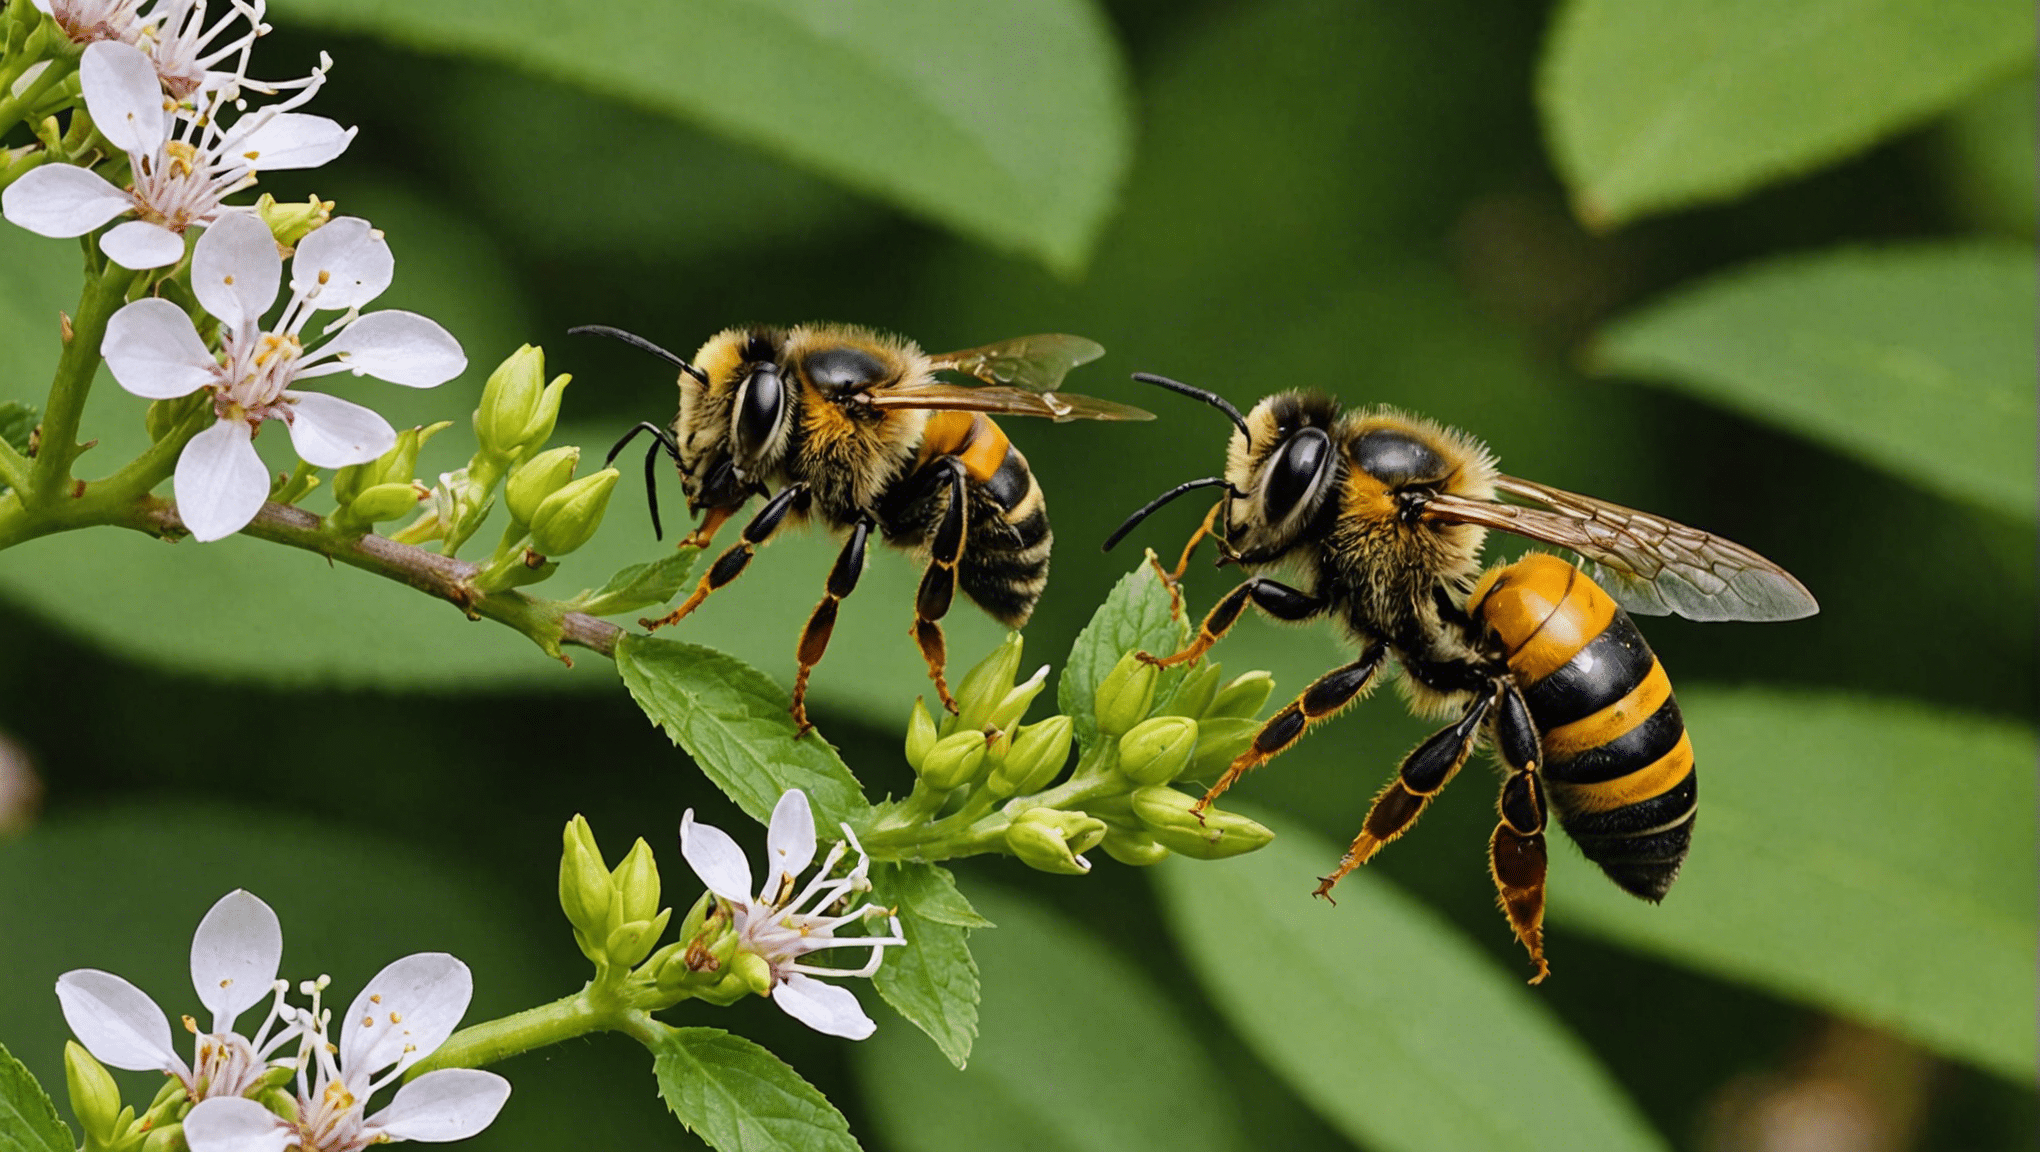 discover the distinctions between bees, wasps, and hornets and learn about their appearance, behavior, and habitats.